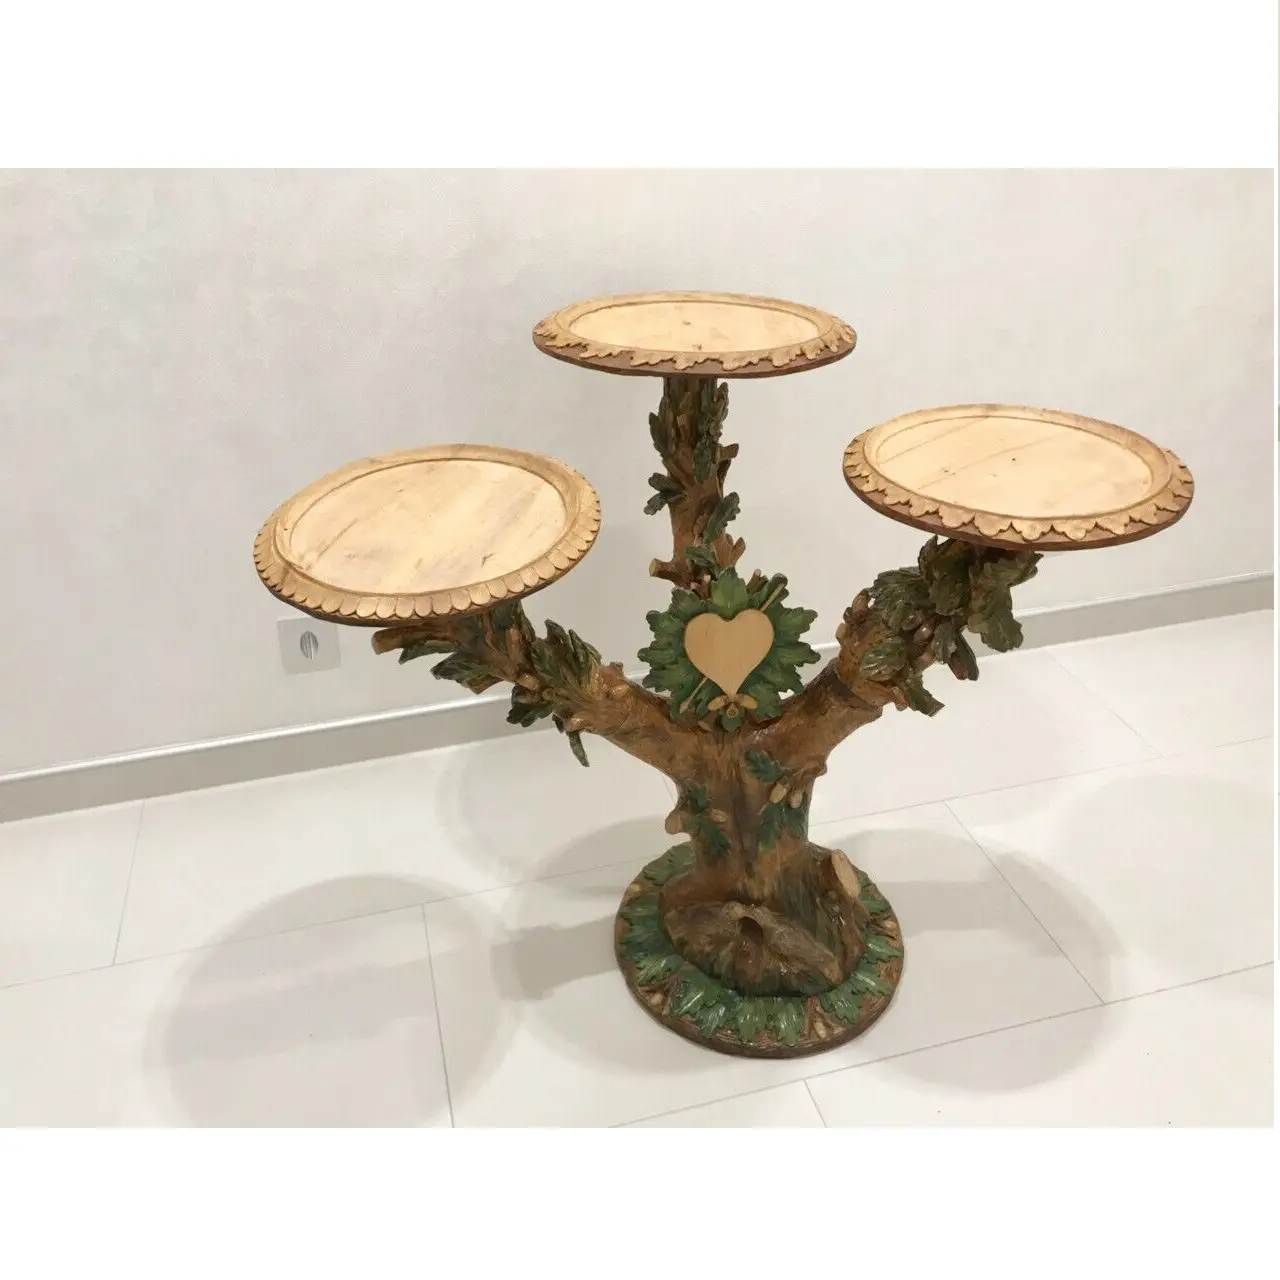 Wooden cake stand 3 tier Mango Wood Home Wedding Birthday Party Dry Items Hotel Decorative Item new arrival available at cheap p